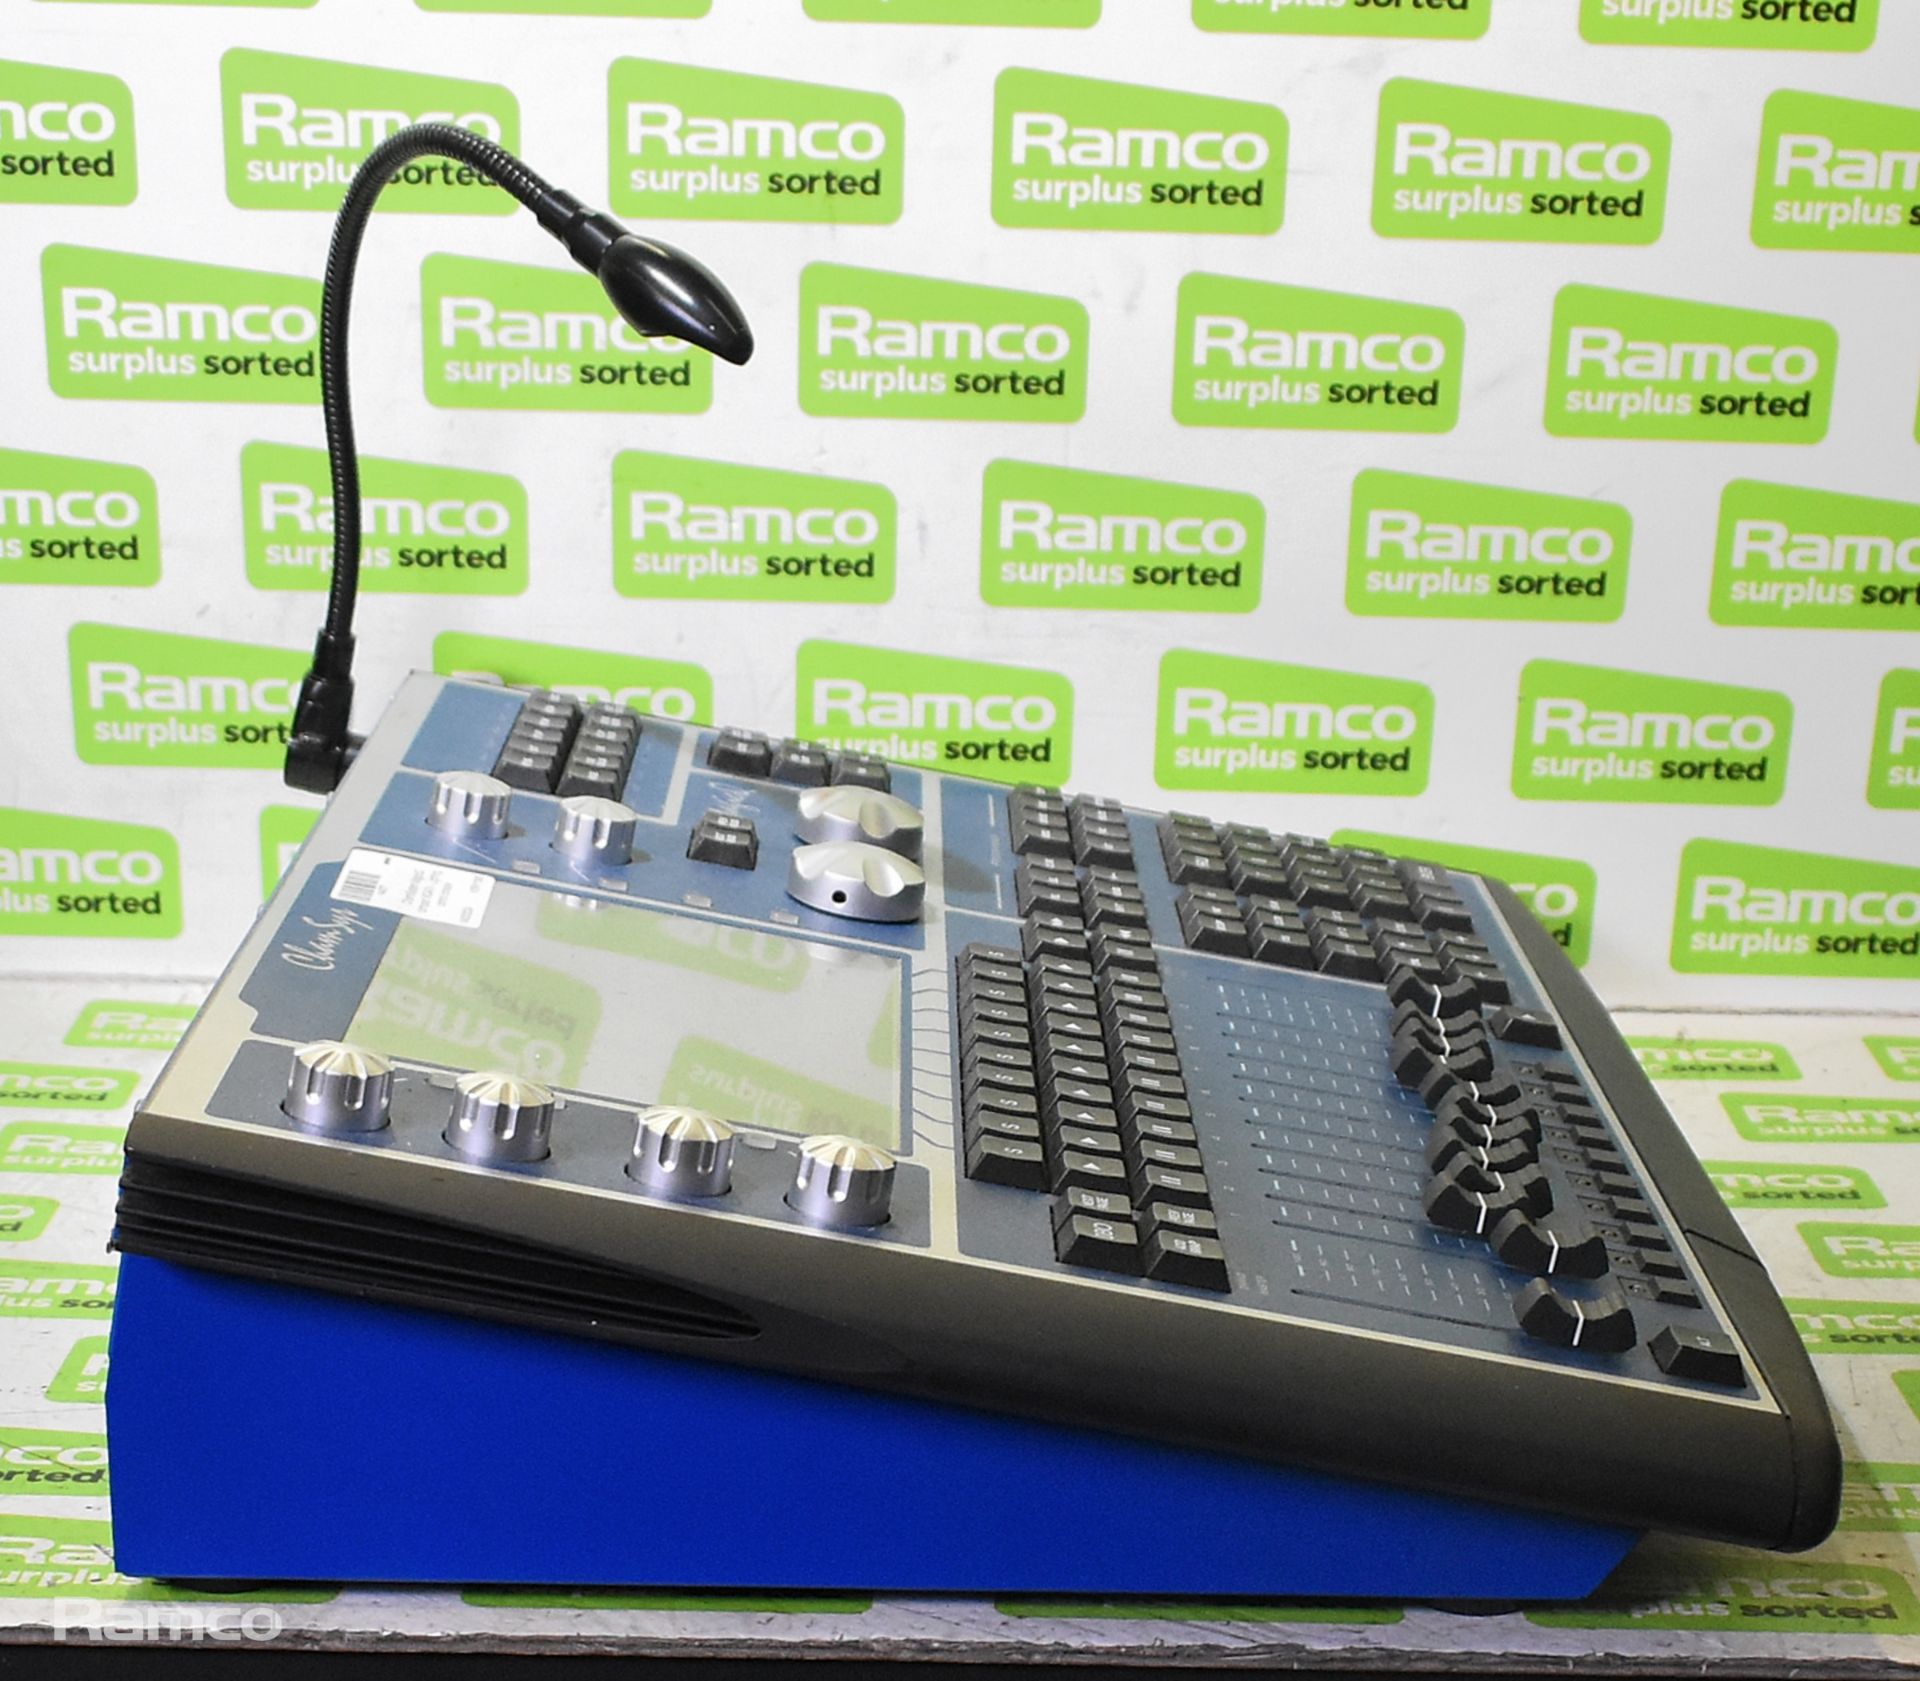 ChamSystem MagicQ compact MQ40N lighting control console - Image 4 of 7